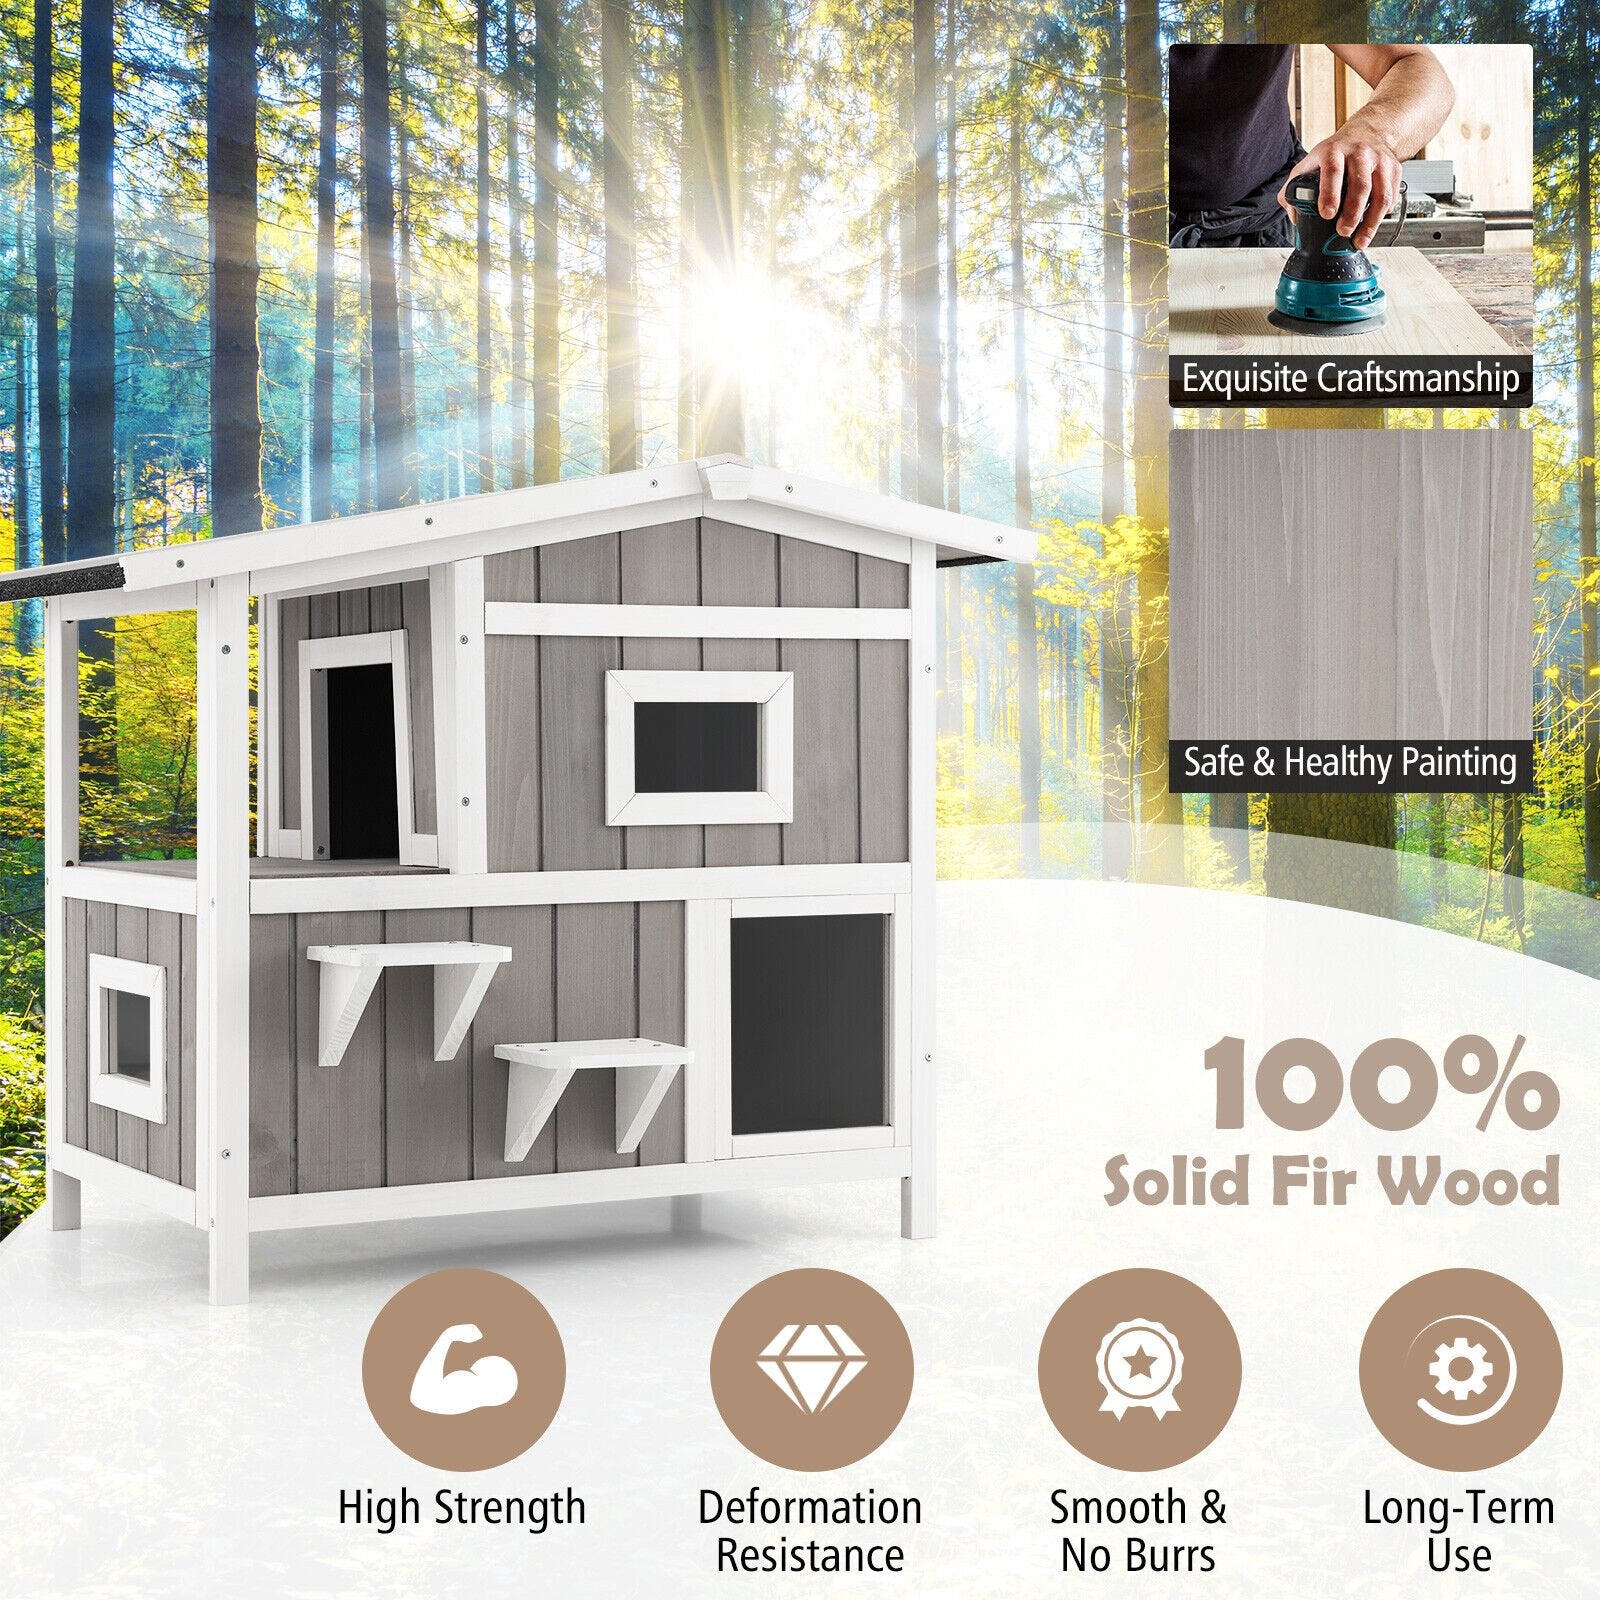 Outdoor 2-Story Wooden Feral Cat House with Escape Door, Gray - Gallery Canada